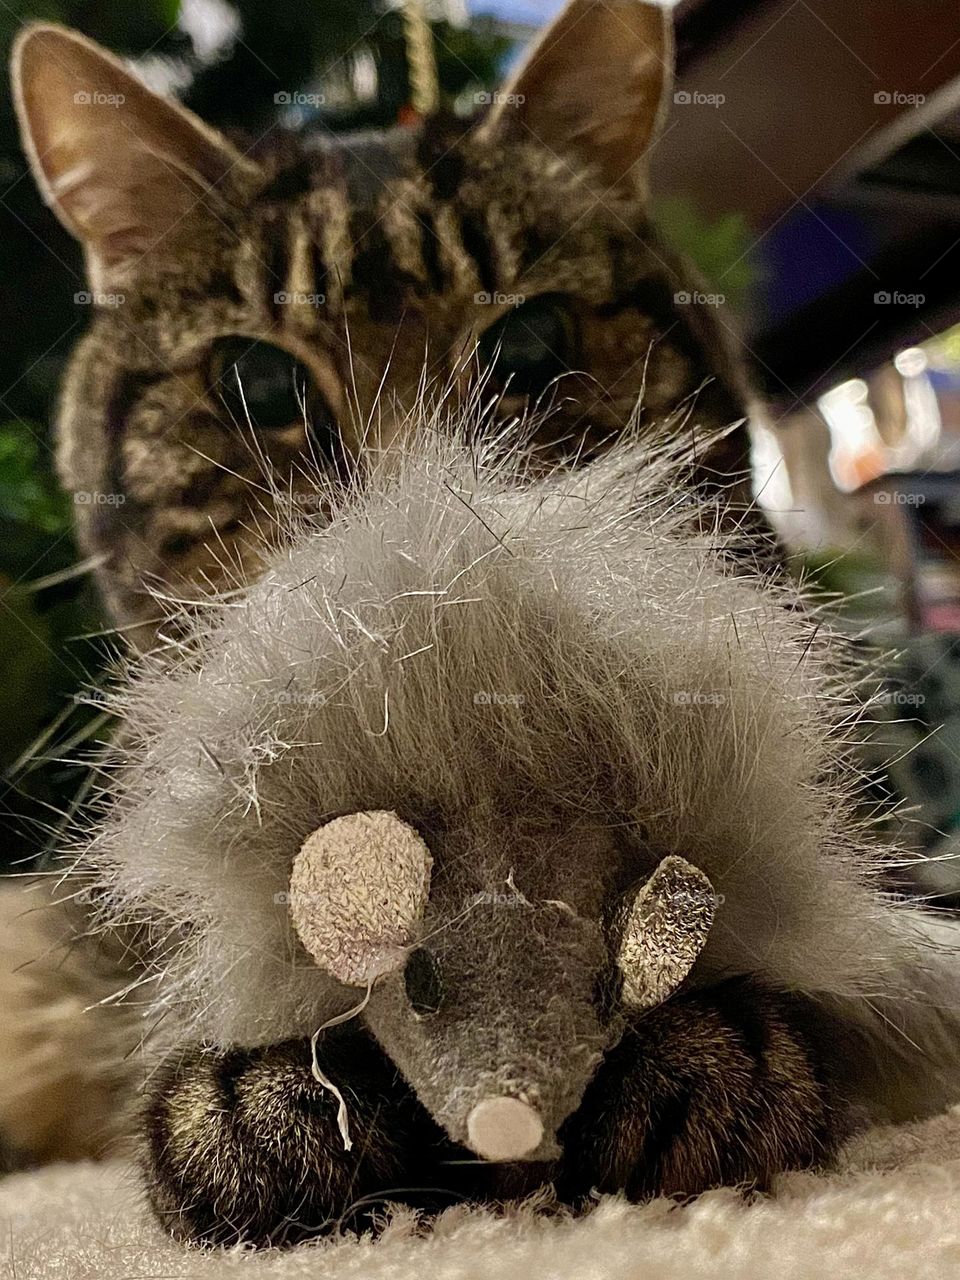 A tabby cat sitting with a fluffy grey toy mouse on her feet